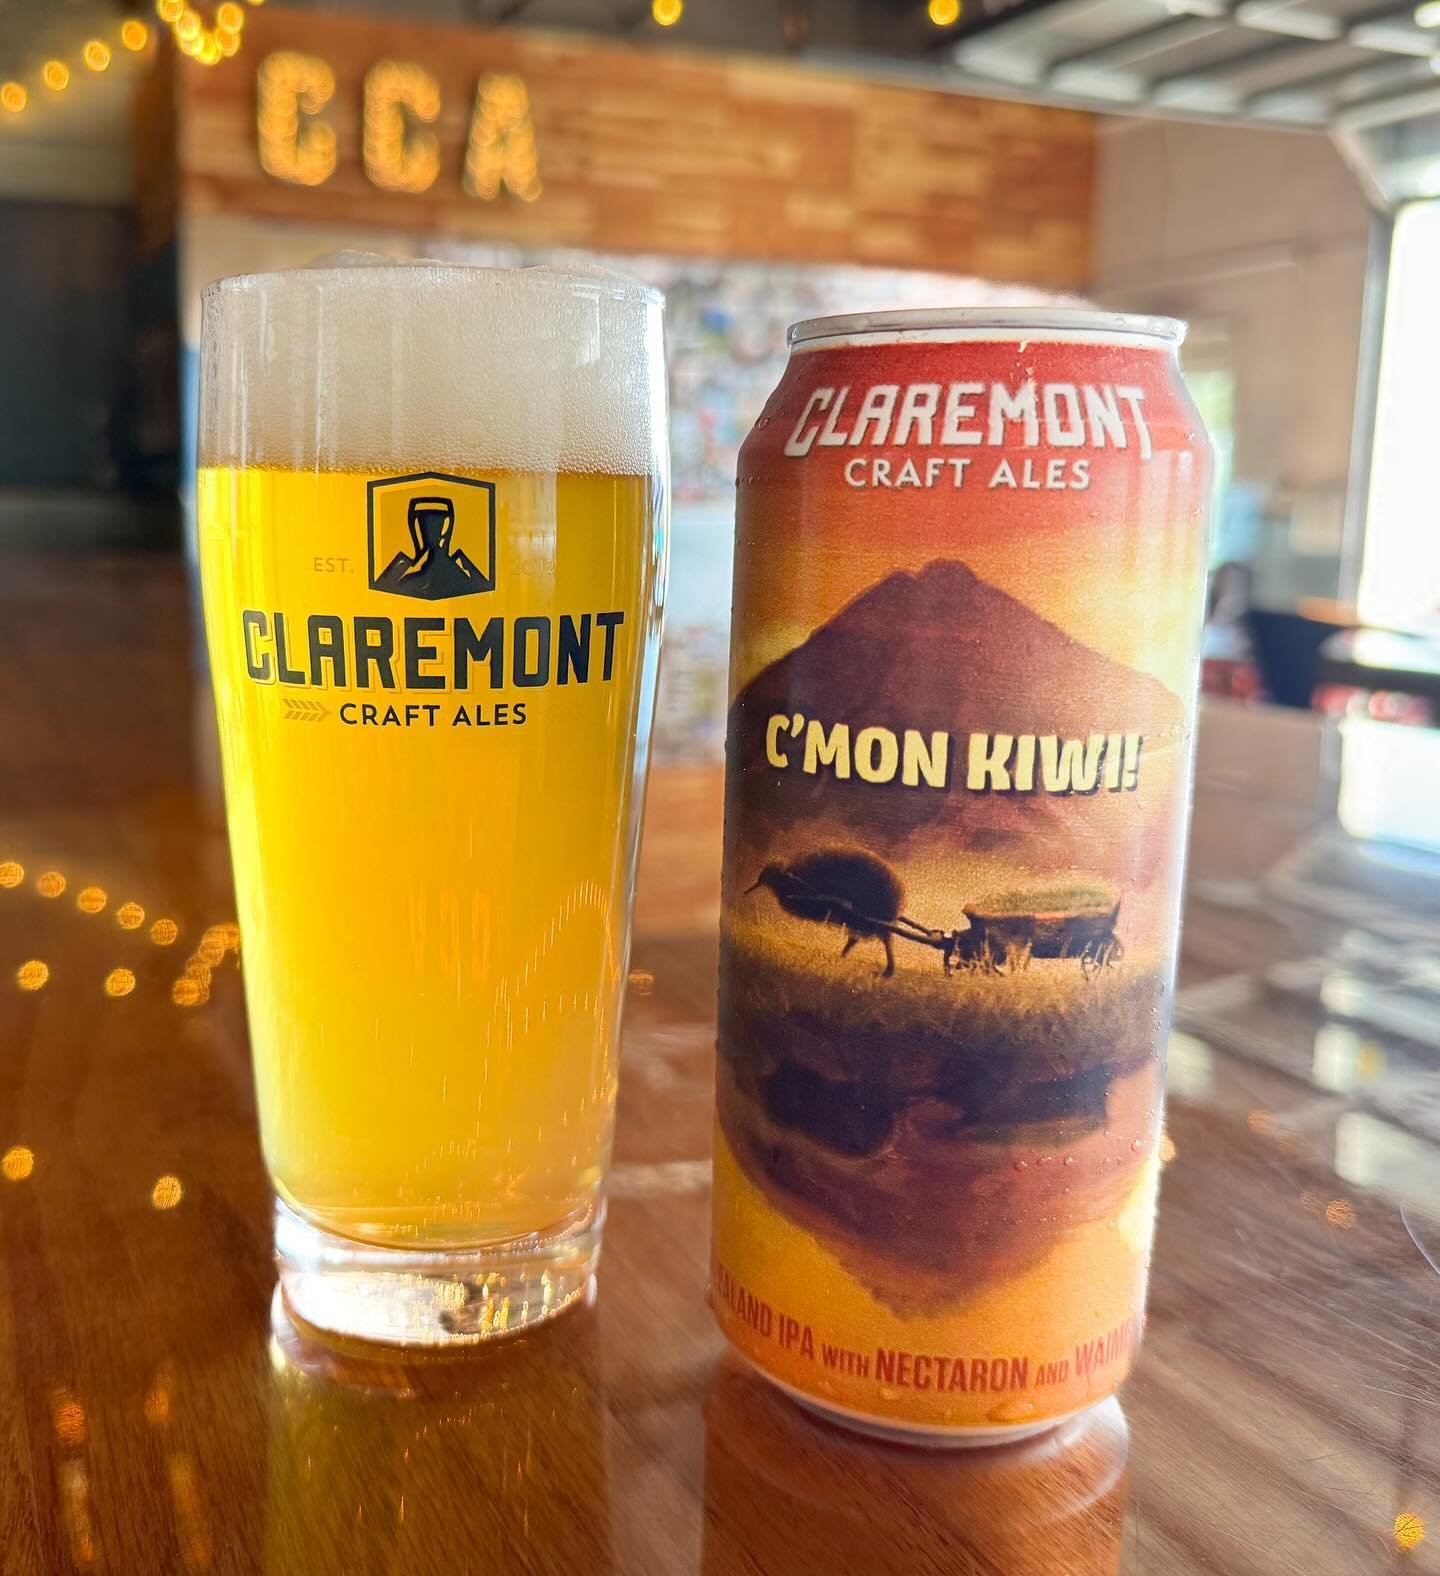 ‼️Our first ever New Zealand IPA, &lsquo;C&rsquo;mon Kiwi&rsquo; drops tomorrow- Friday, May 3rd! ‼️

#claremontcraftales #cca #claremontbeer #newzealandipa #nzhops